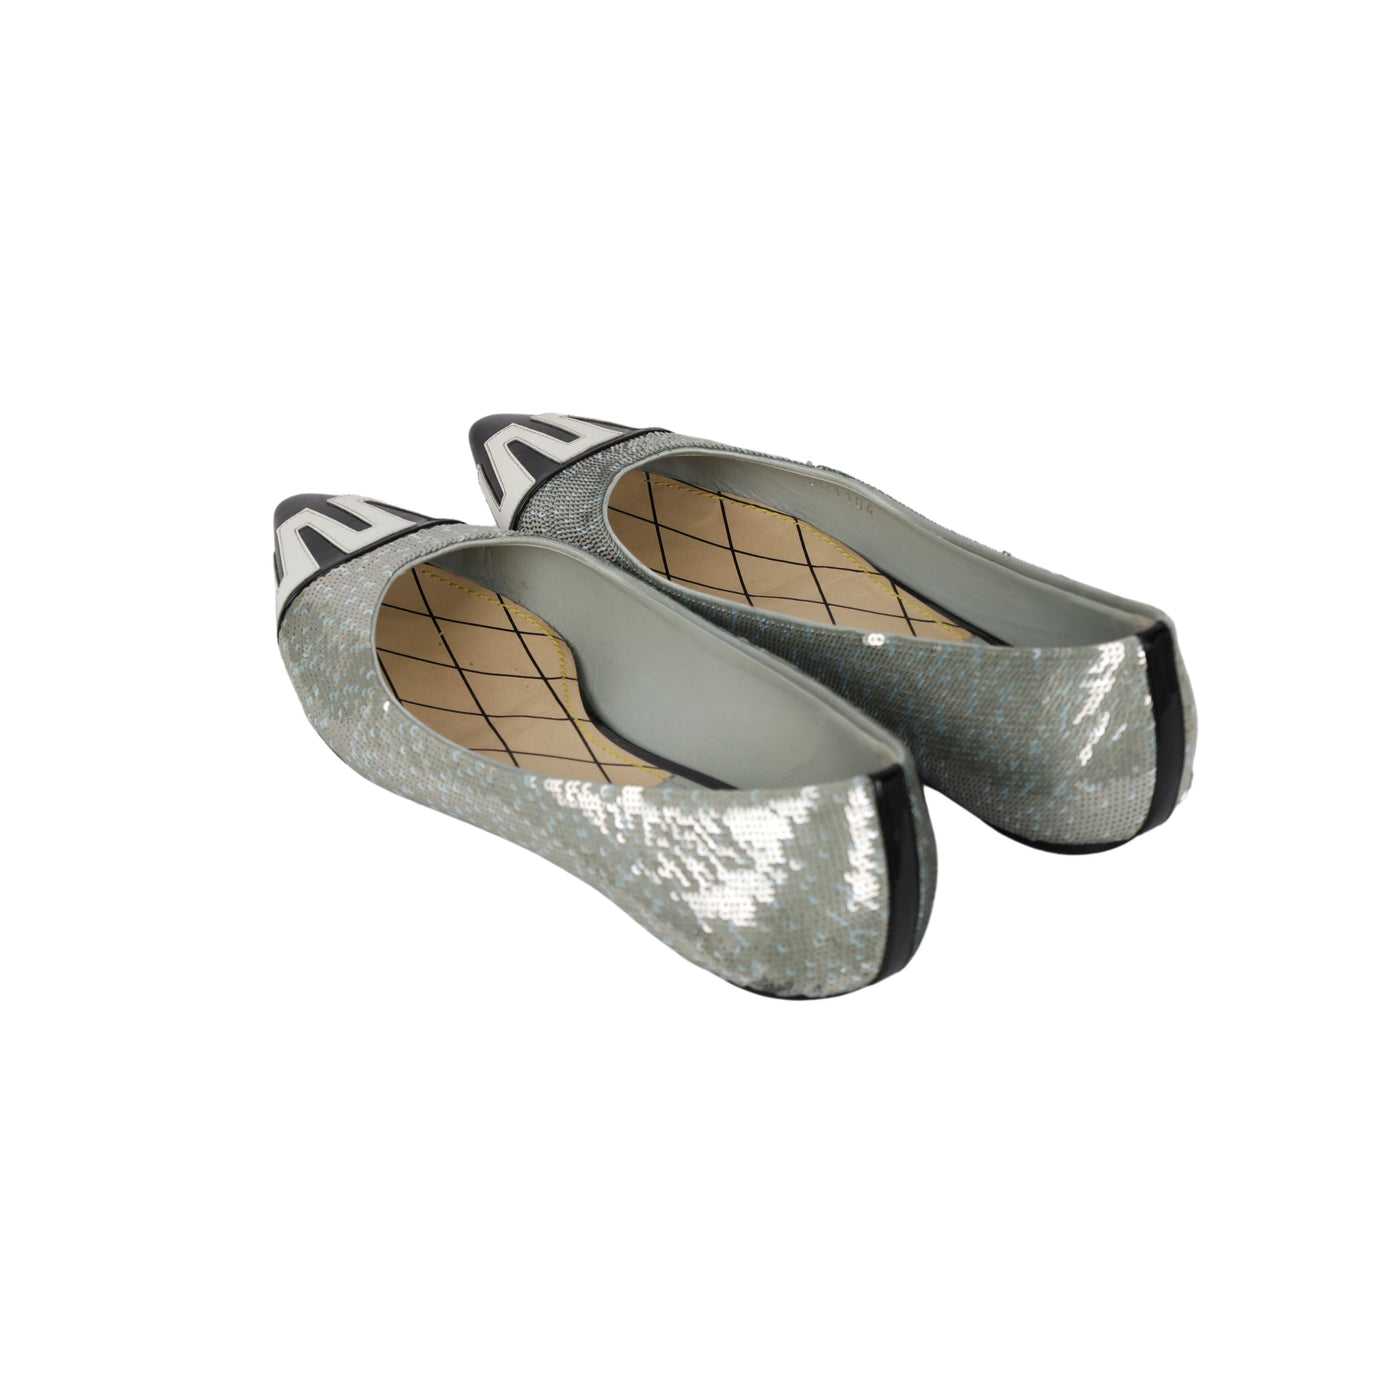 Secondhand Louis Vuitton Sequin Pointed Toe Flats